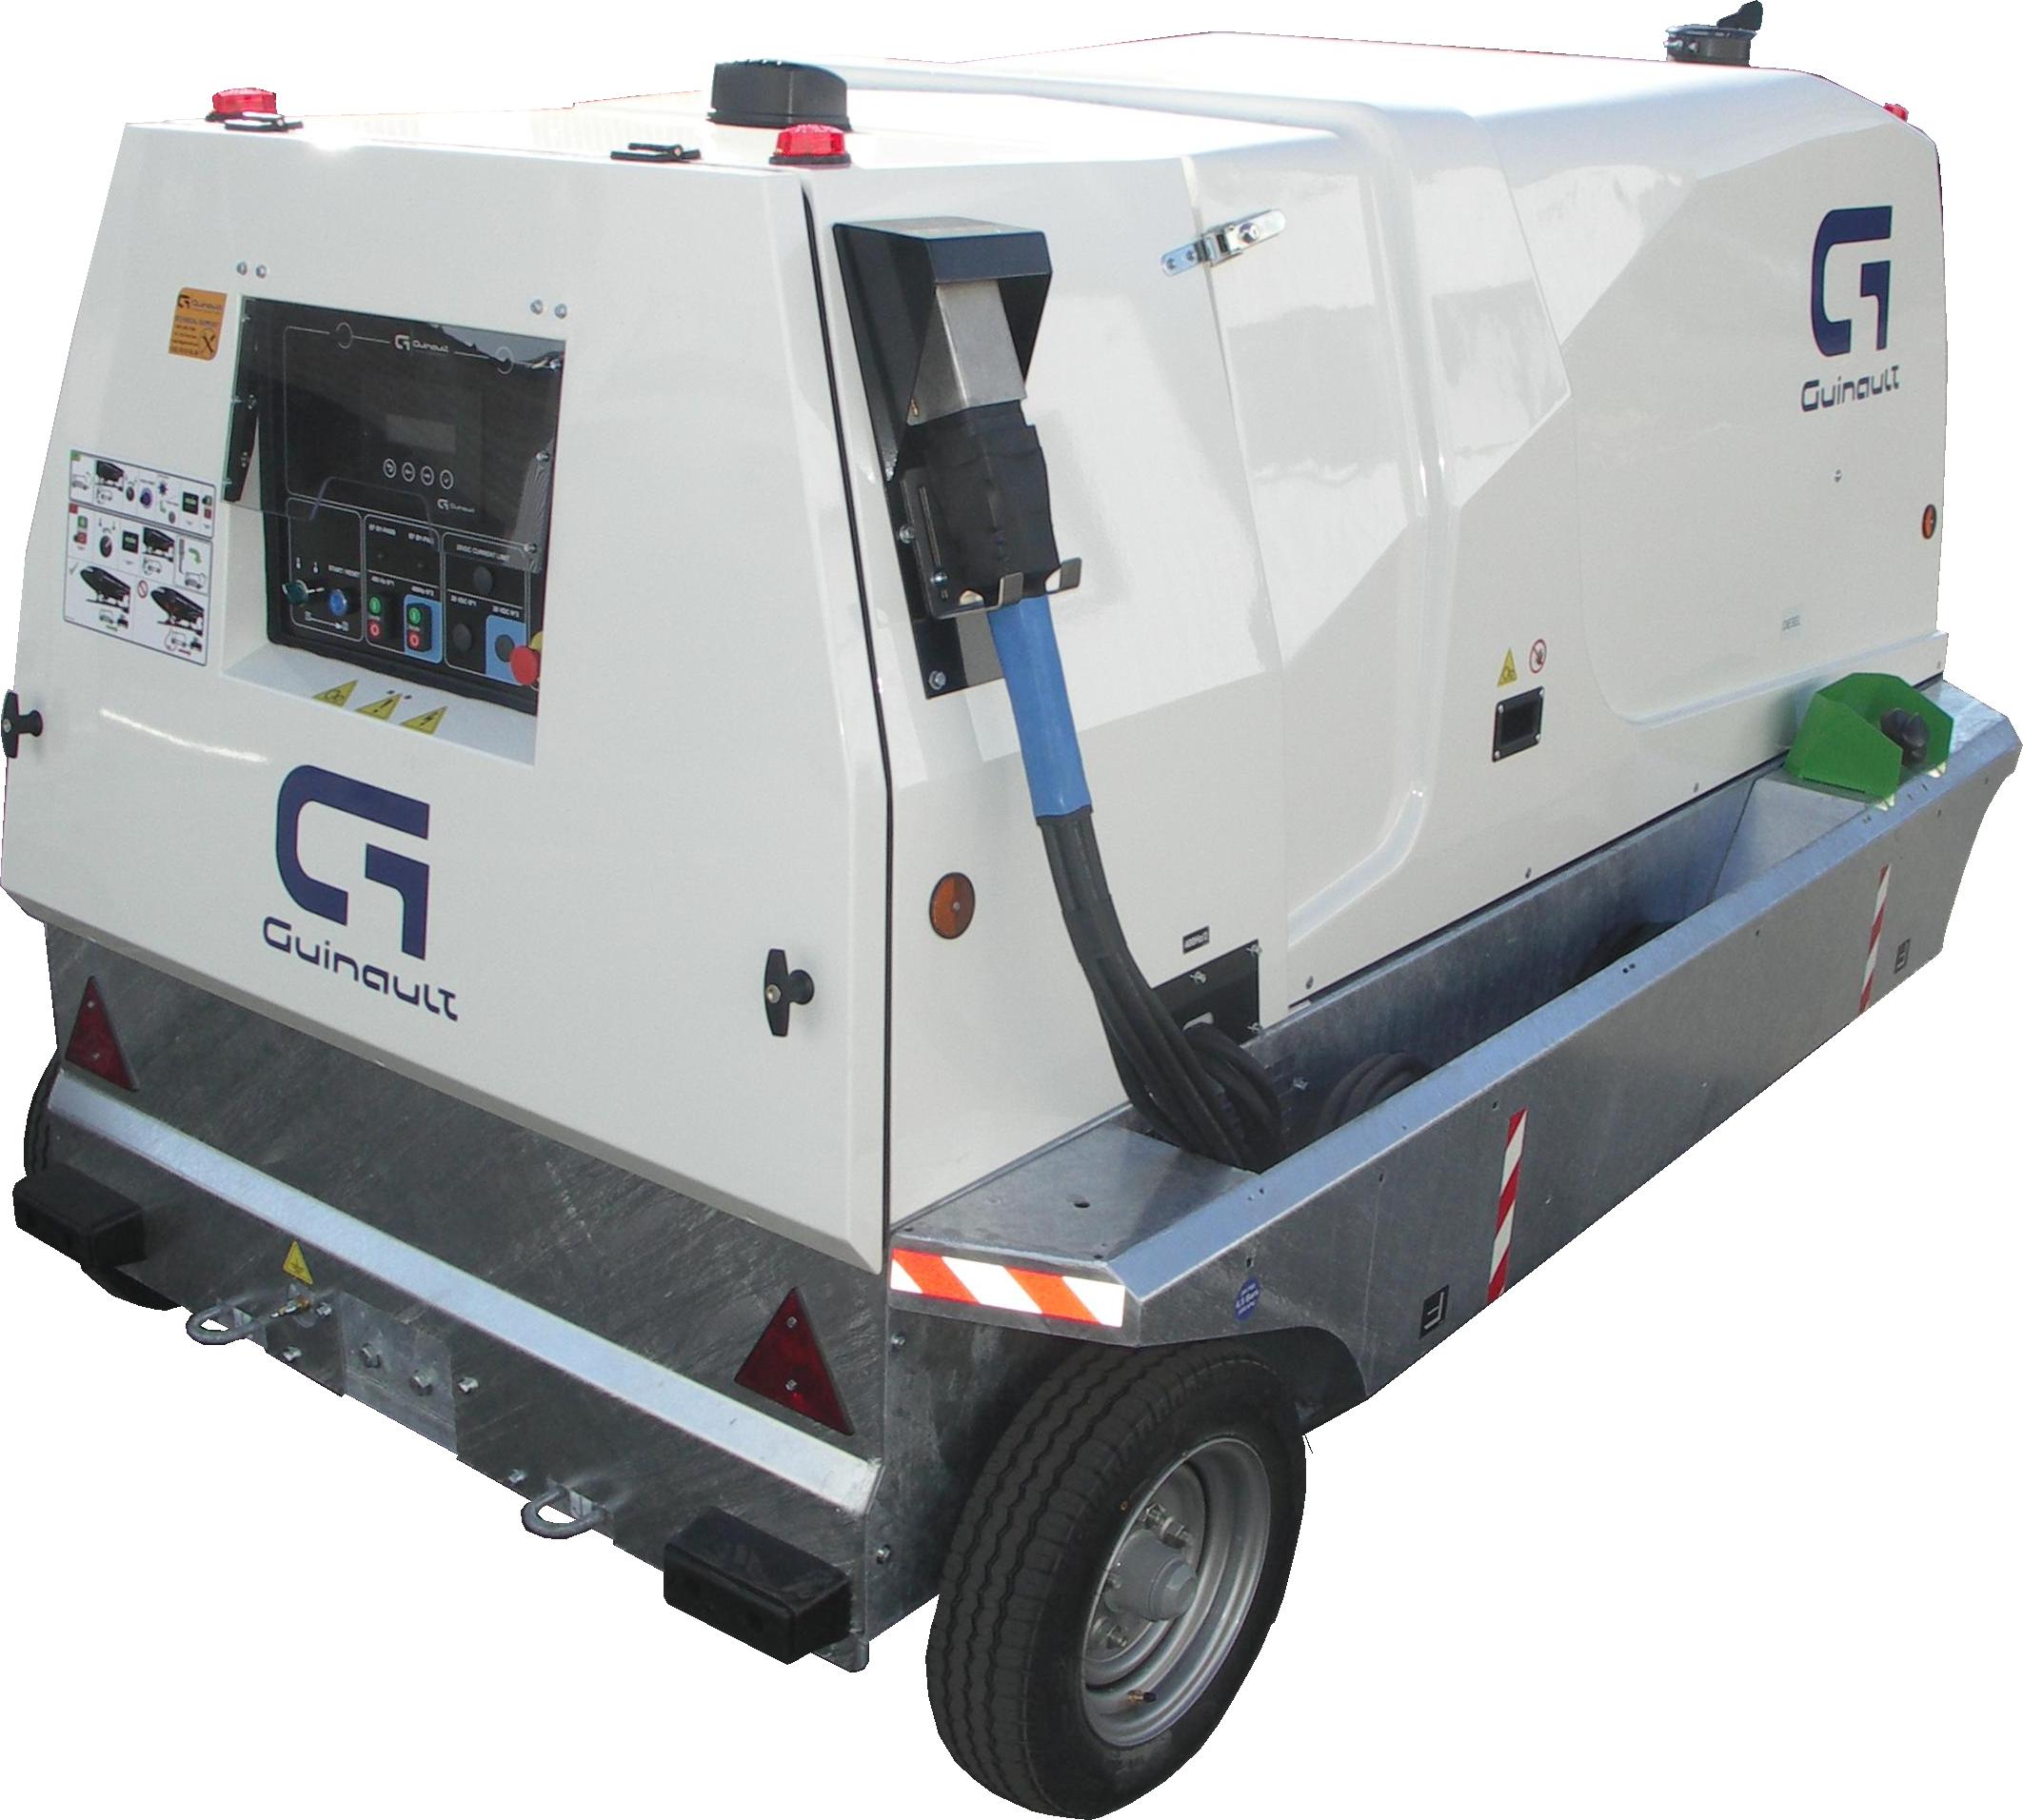 Et kors montering Vend om GA range - Mobile 400 Hz Ground Power Unit (Diesel Engine Driven) from 90  to 180 kVA - Airport Suppliers